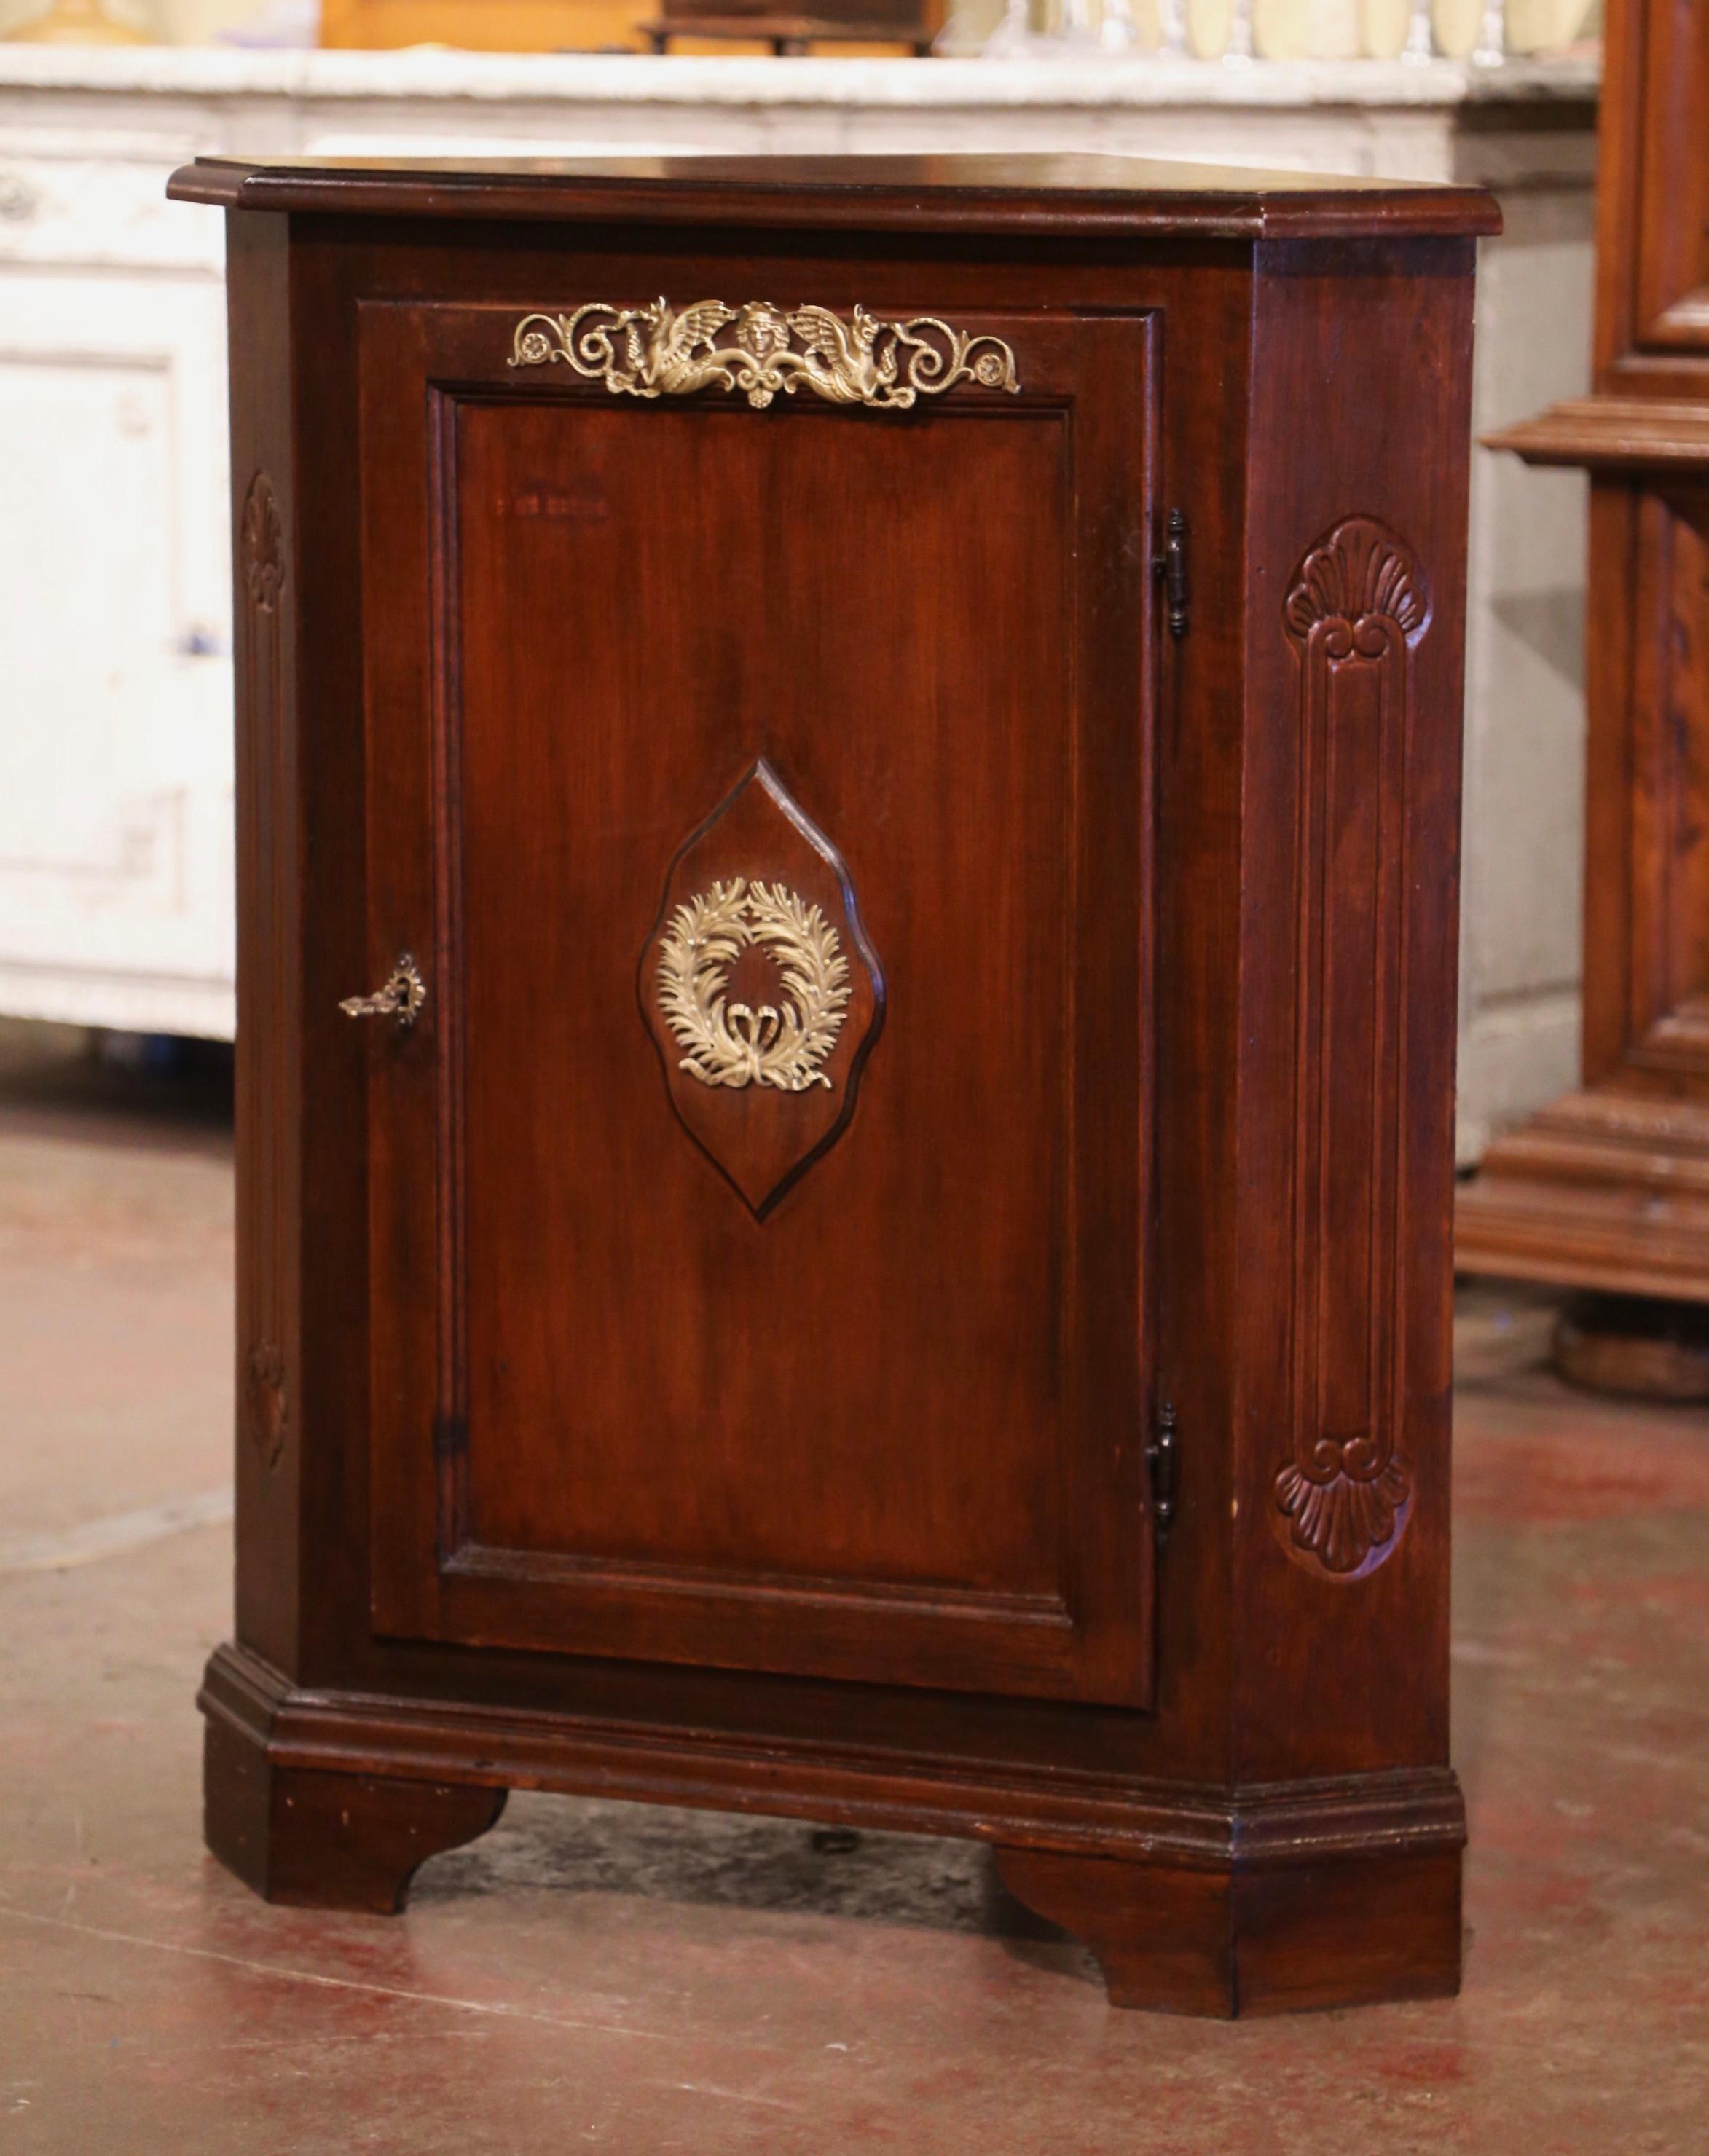 This elegant antique corner cabinet was created in France circa 1950. Built of mahogany wood, the cupboard stands on bracket feet over a straight plinth. The small buffet is fitted with a single door with recessed panel and embellished with a brass